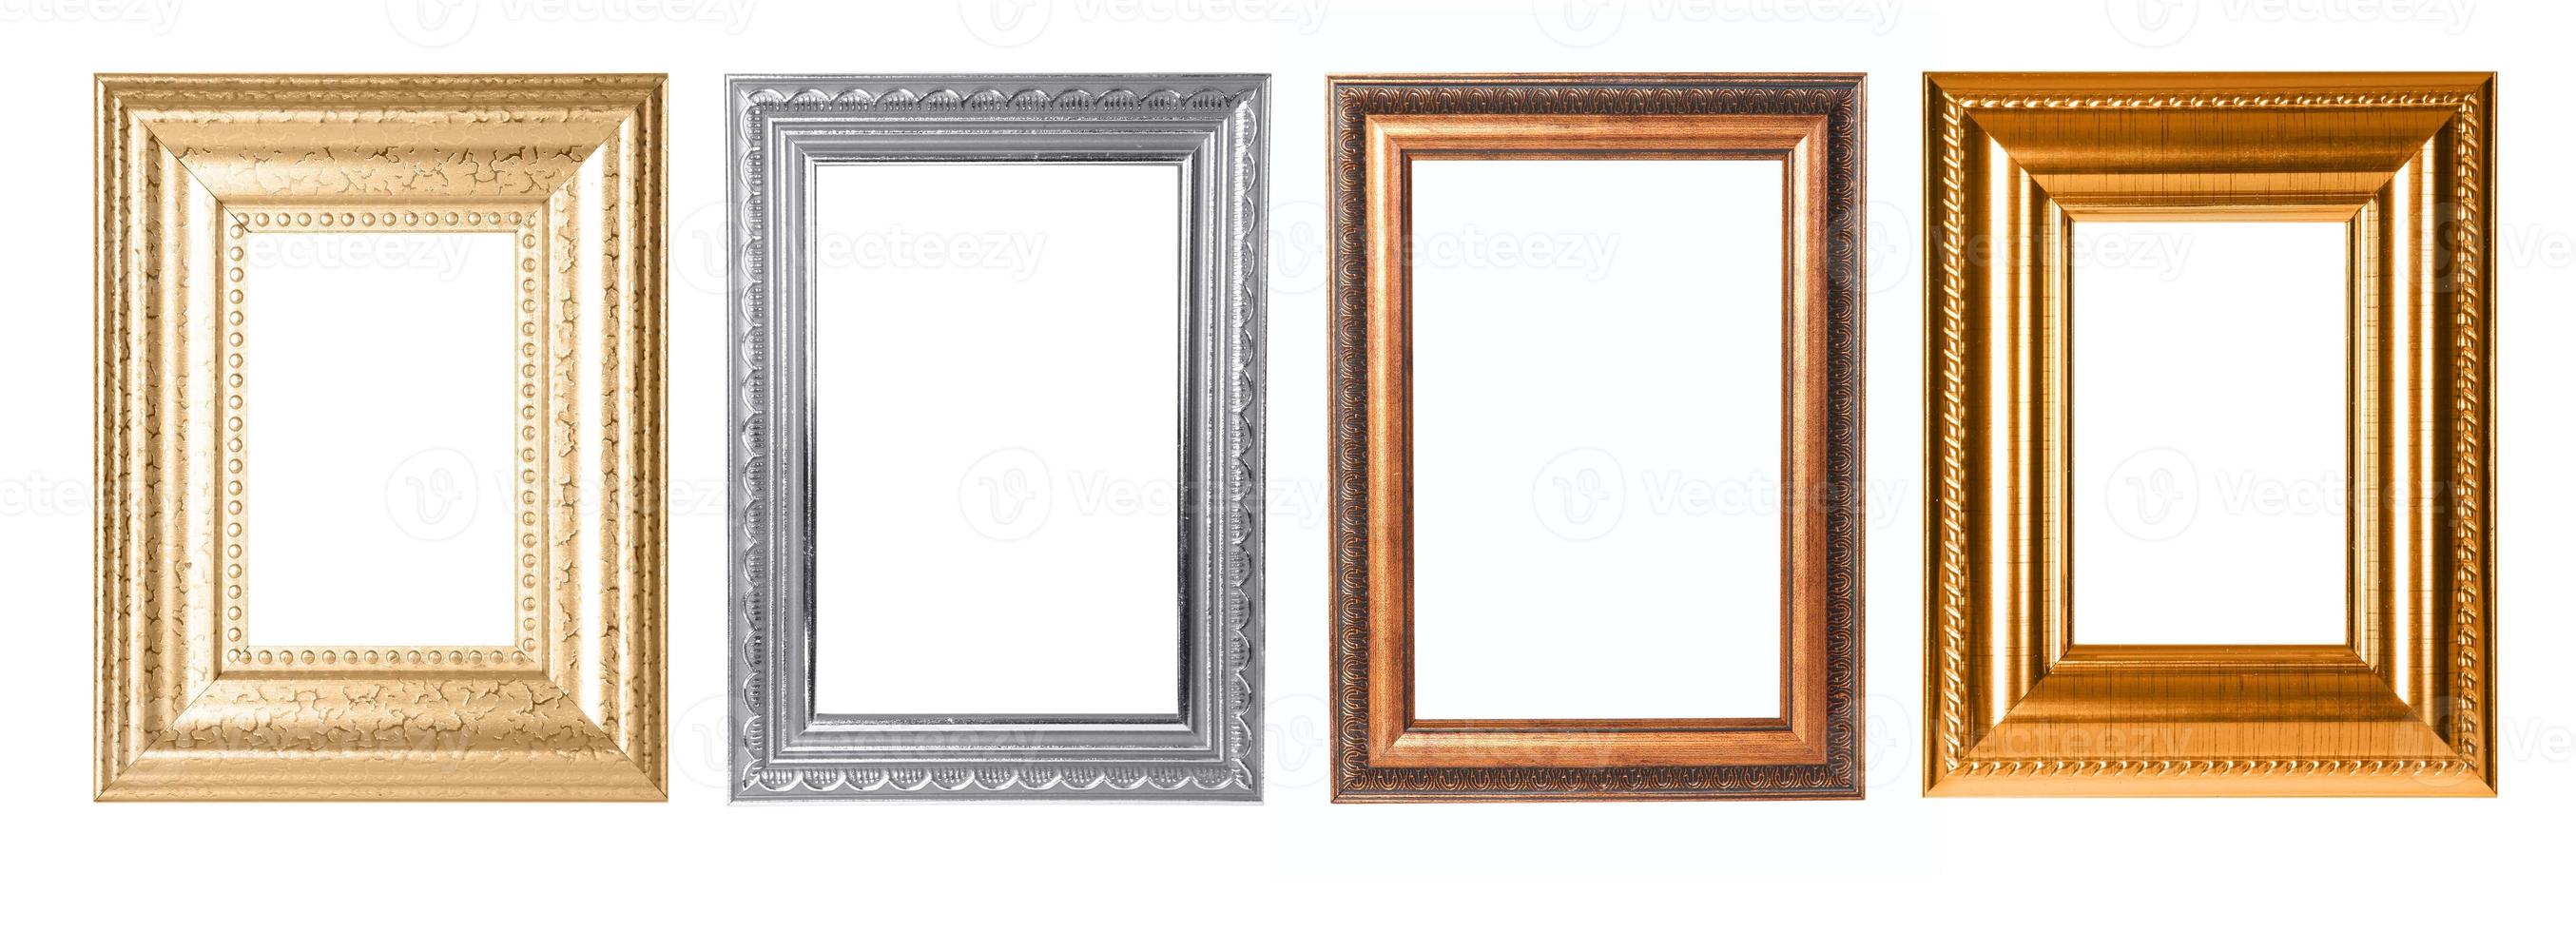 Rectangular Decorative Frames For Your Project photo